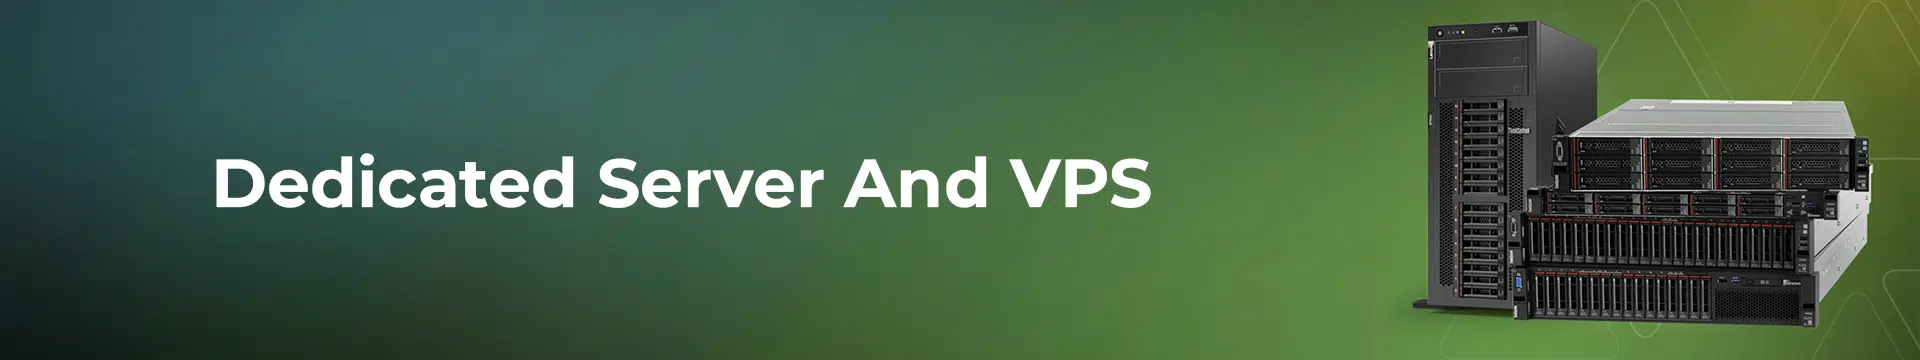 Dedicated Server And VPS — Unlocking Complete Freedom Of Action